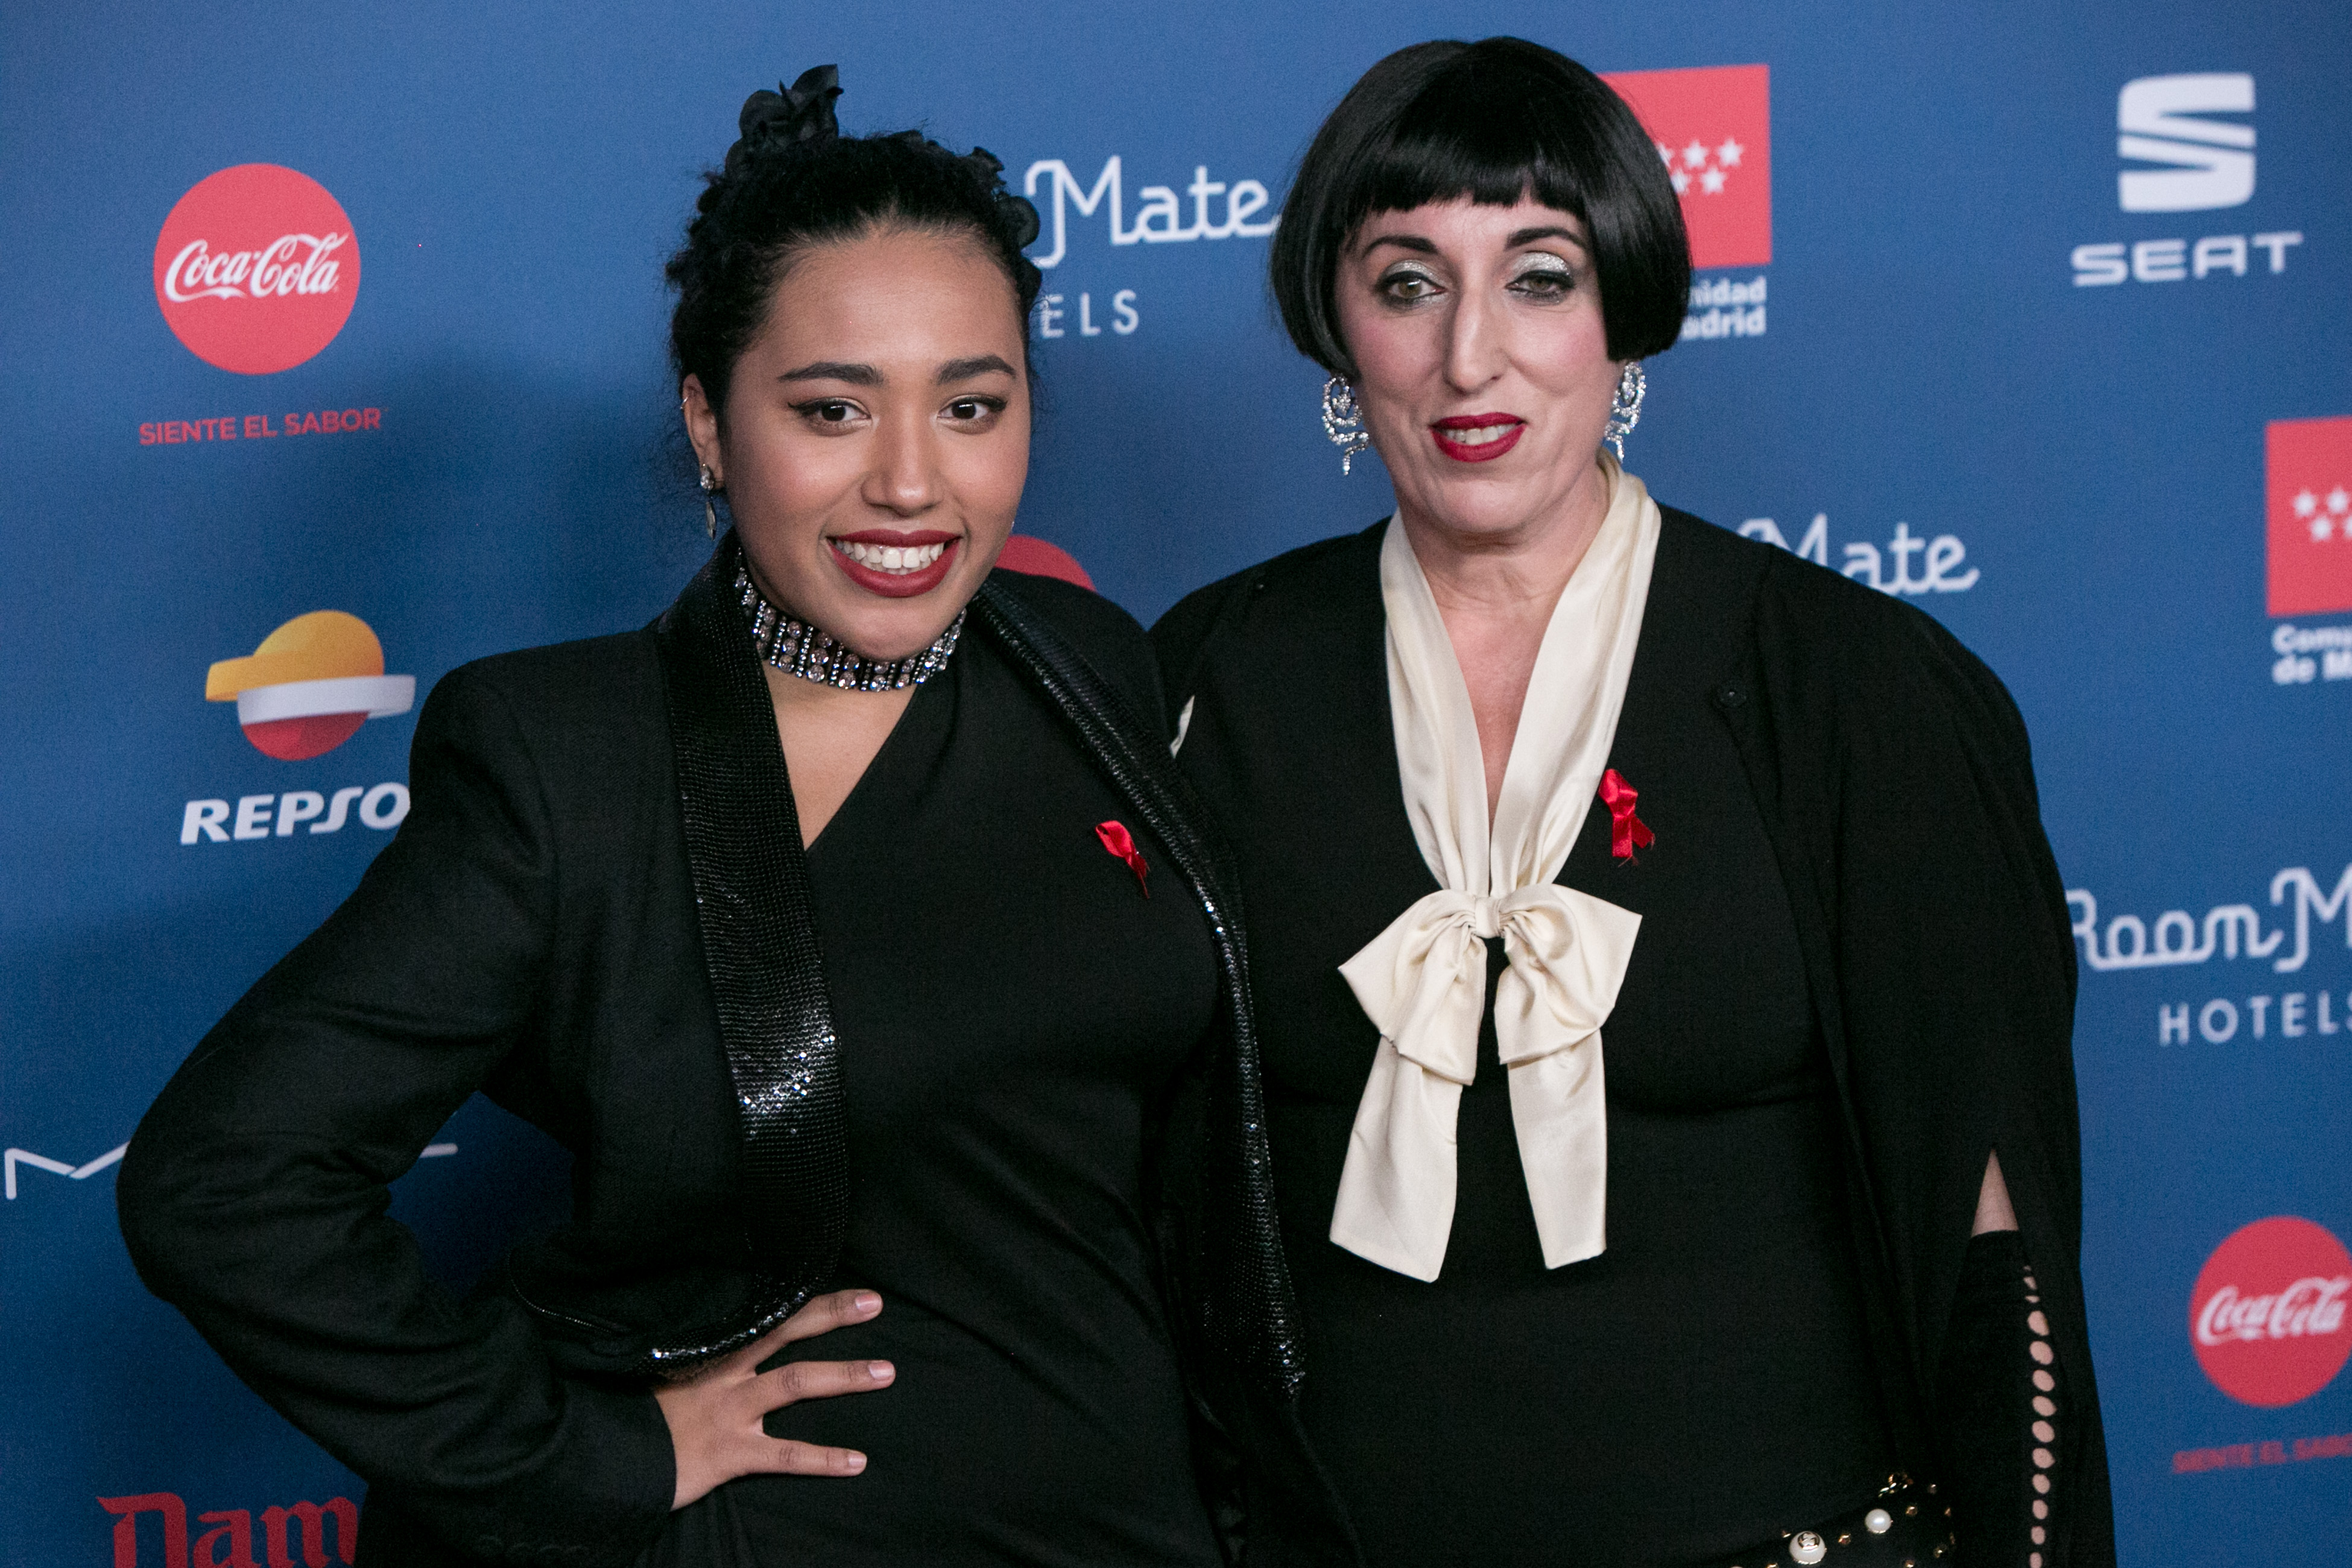 Luna Garcia and Rossy de Palma at the "Gala Sida" 2016 at Cibeles Palace on November 21, 2016 in Madrid, Spain. | Source: Getty Images